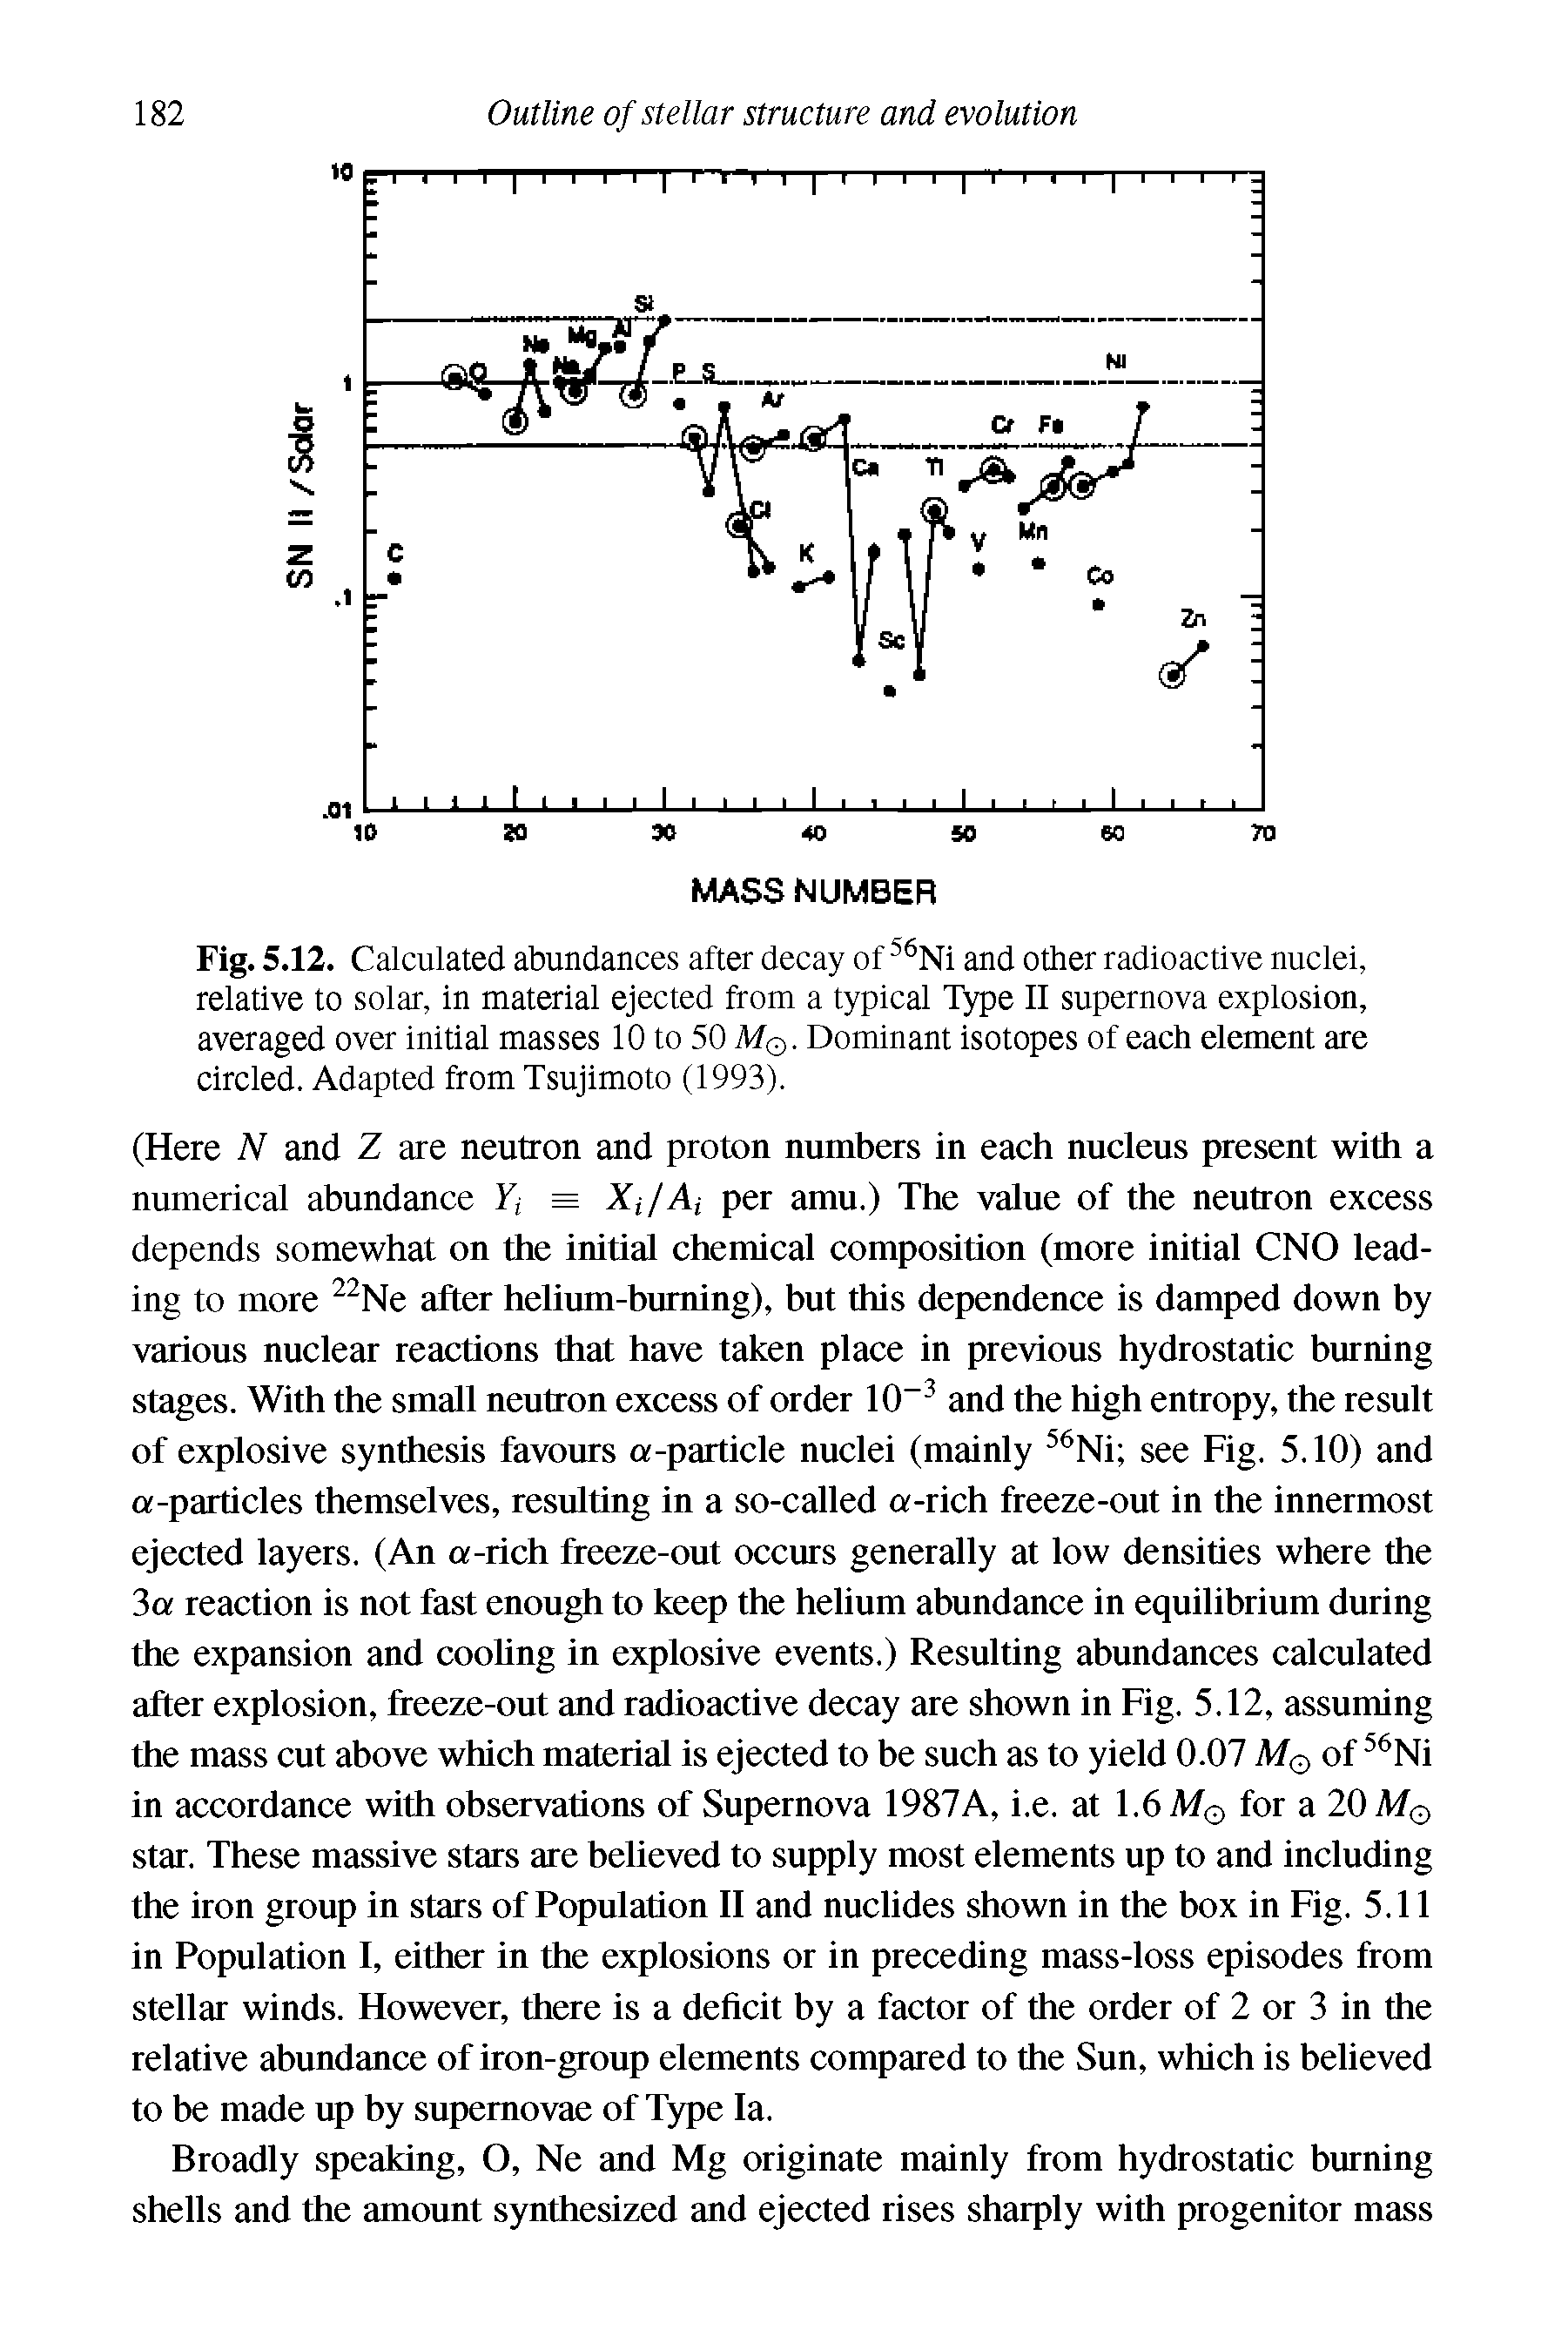 Fig. 5.12. Calculated abundances after decay of 56Ni and other radioactive nuclei, relative to solar, in material ejected from a typical Type II supernova explosion, averaged over initial masses 10 to 50 M . Dominant isotopes of each element are circled. Adapted from Tsujimoto (1993).